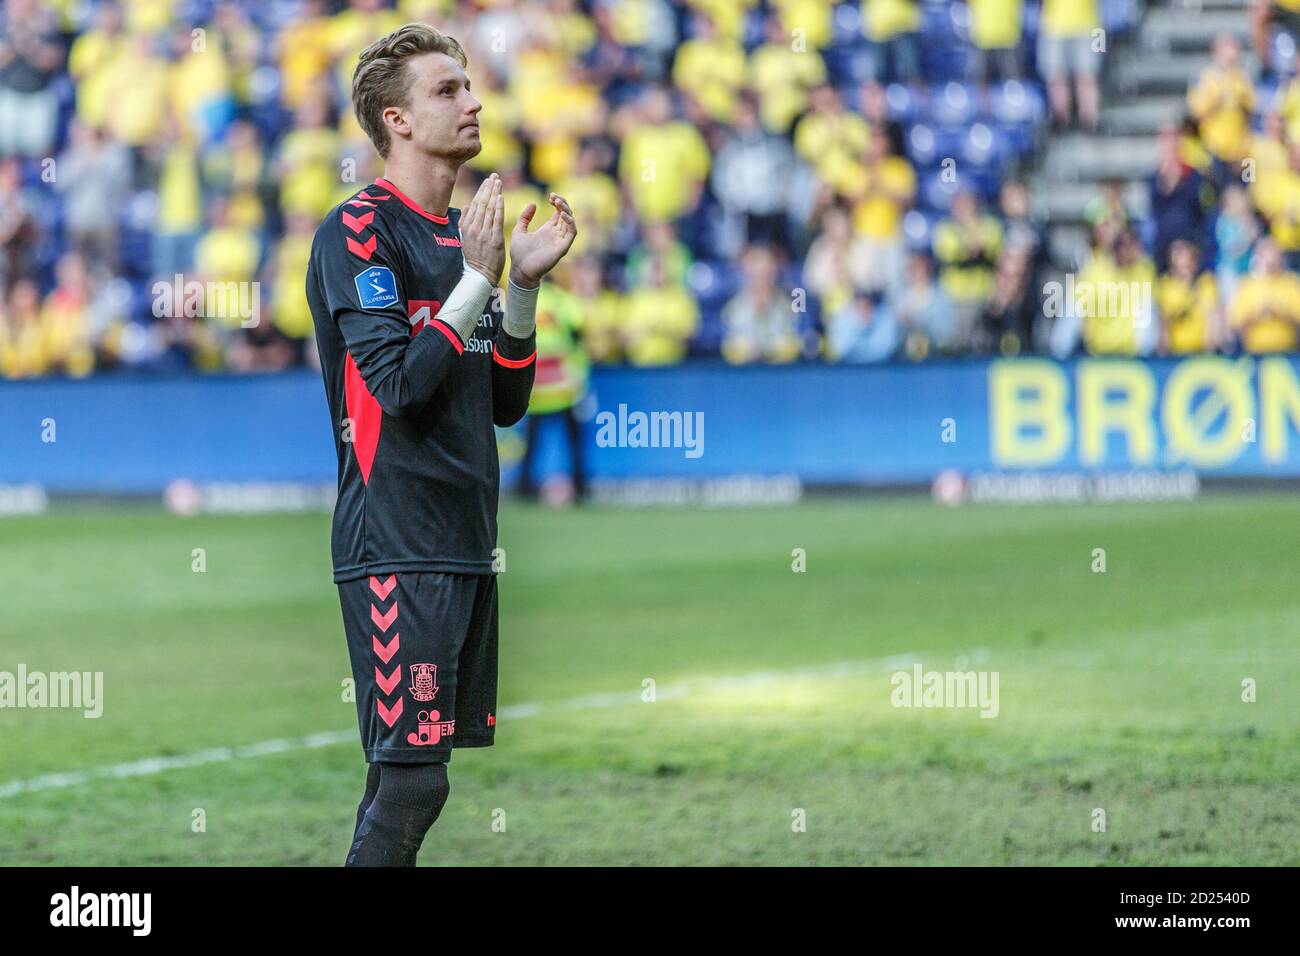 Brondby, Denmark. 21st, May 2018. Goalkeeper Frederik Ronnow (1) of Broendby IF seen after the 3F Superliga match between Broendby IF and AAB at Brondby Stadium. (Photo credit: Gonzales Photo - Thomas Rasmussen). Stock Photo